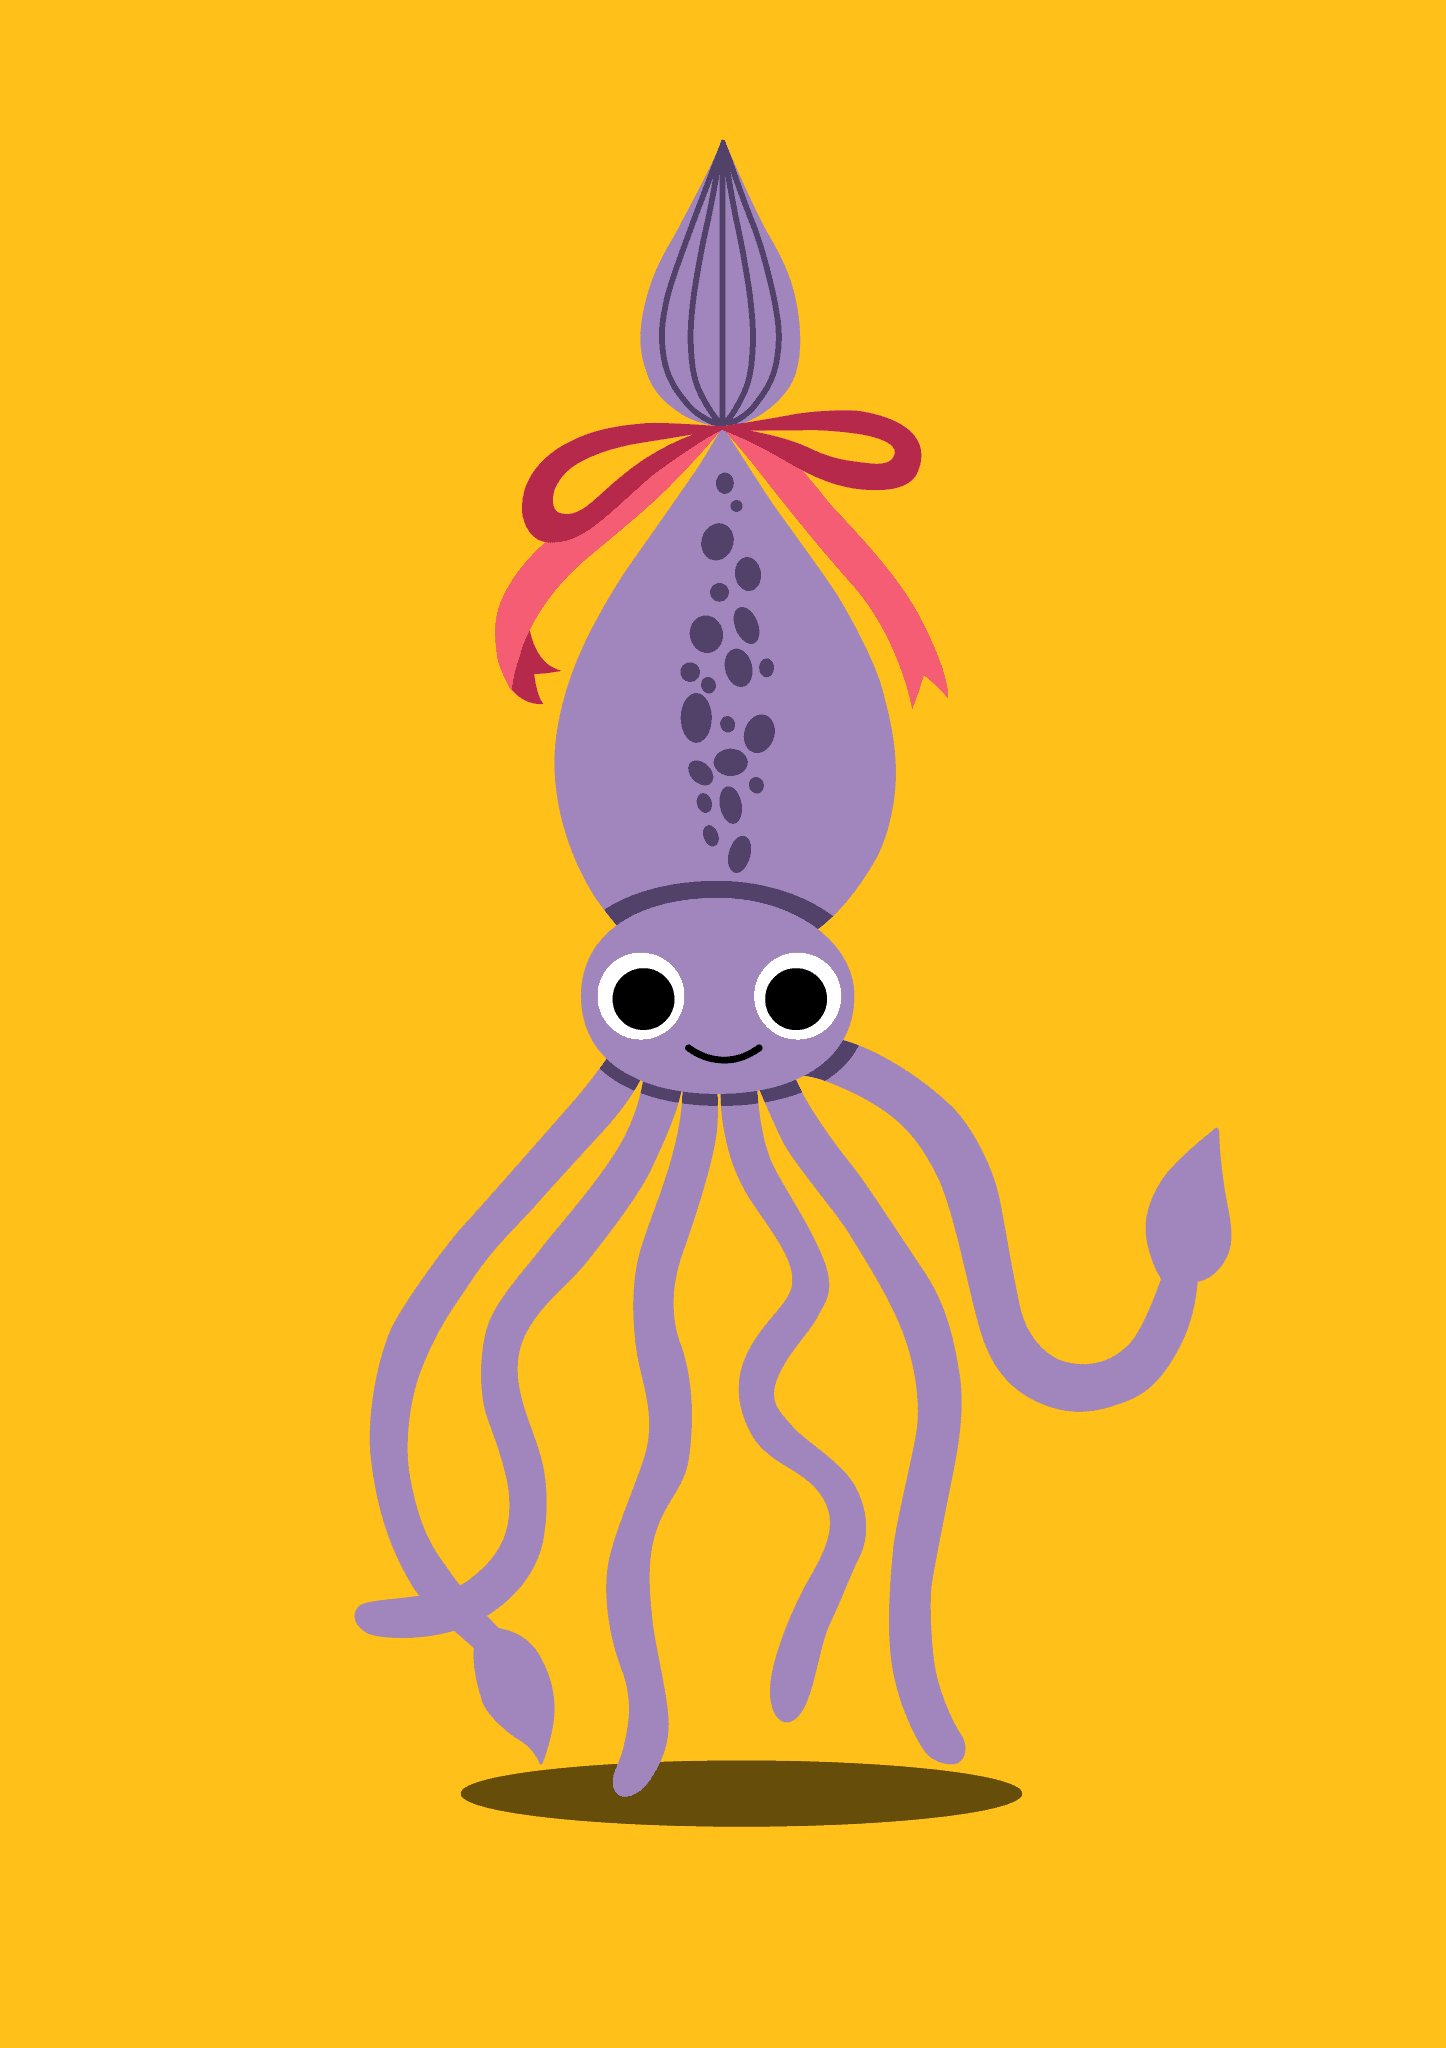 Vector illustration of Loola, a smiley purple squid, with a pink bow on her head.